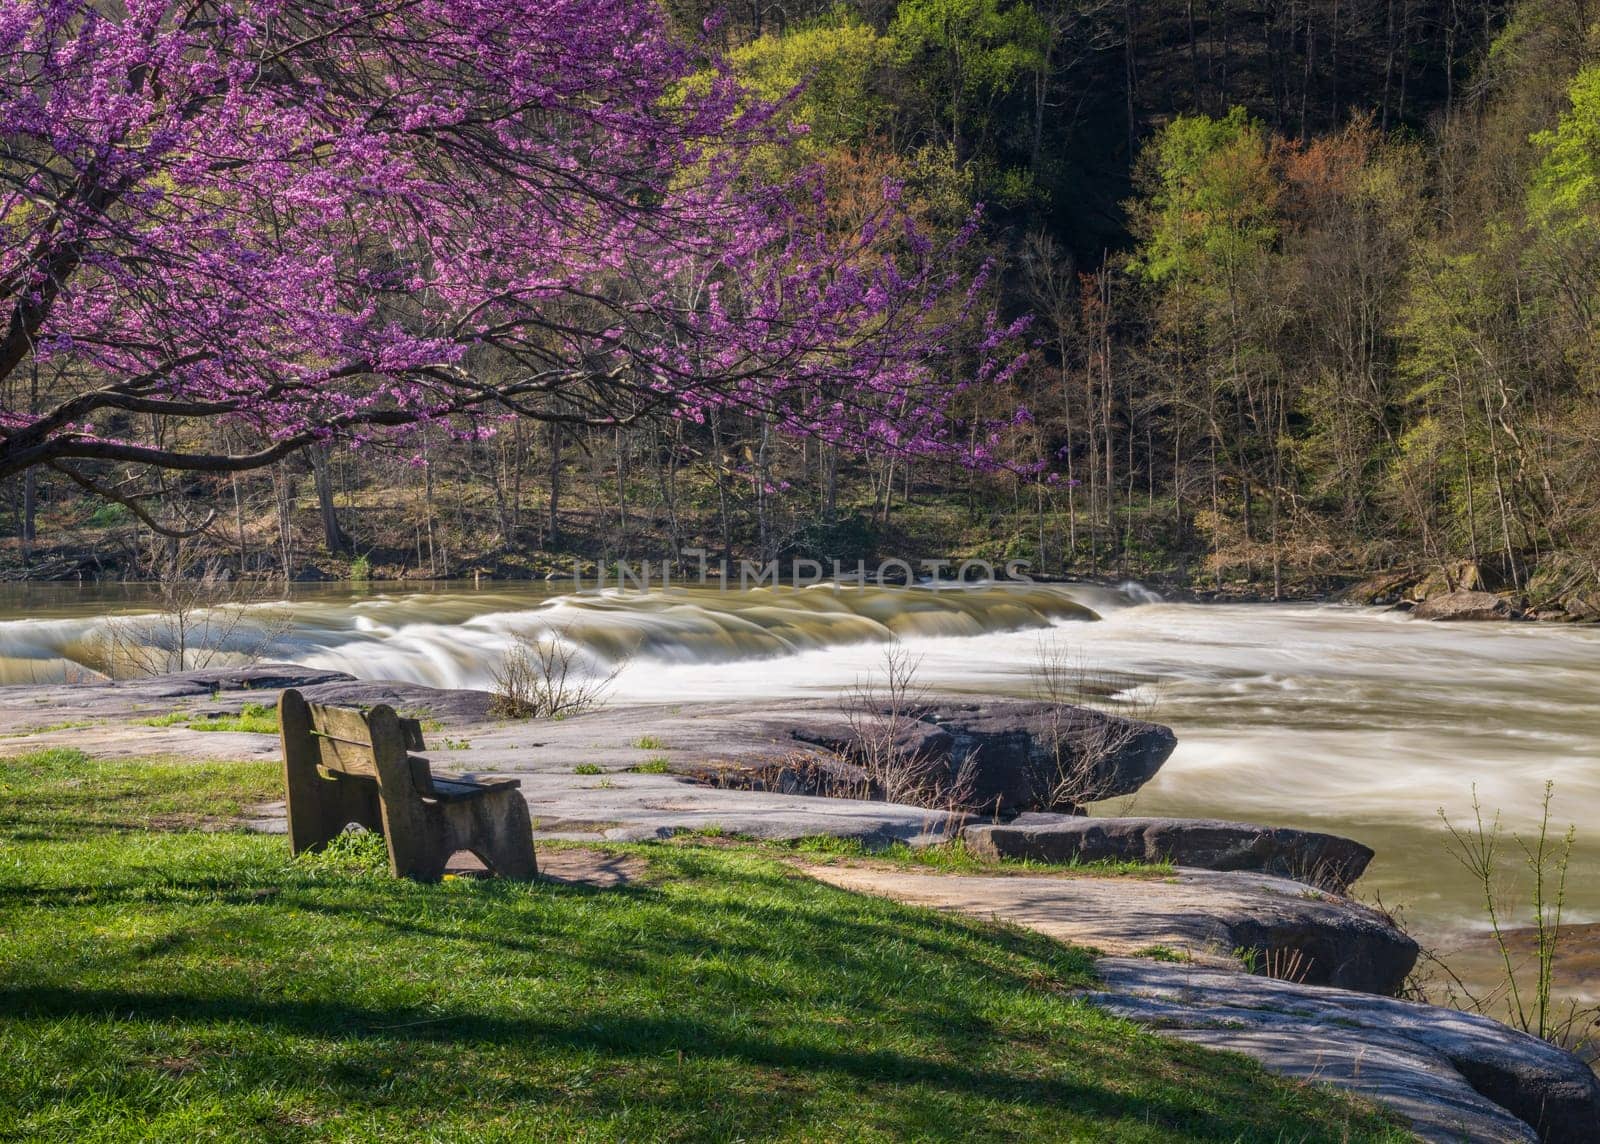 Wooden bench view of Valley Falls on spring morning by steheap